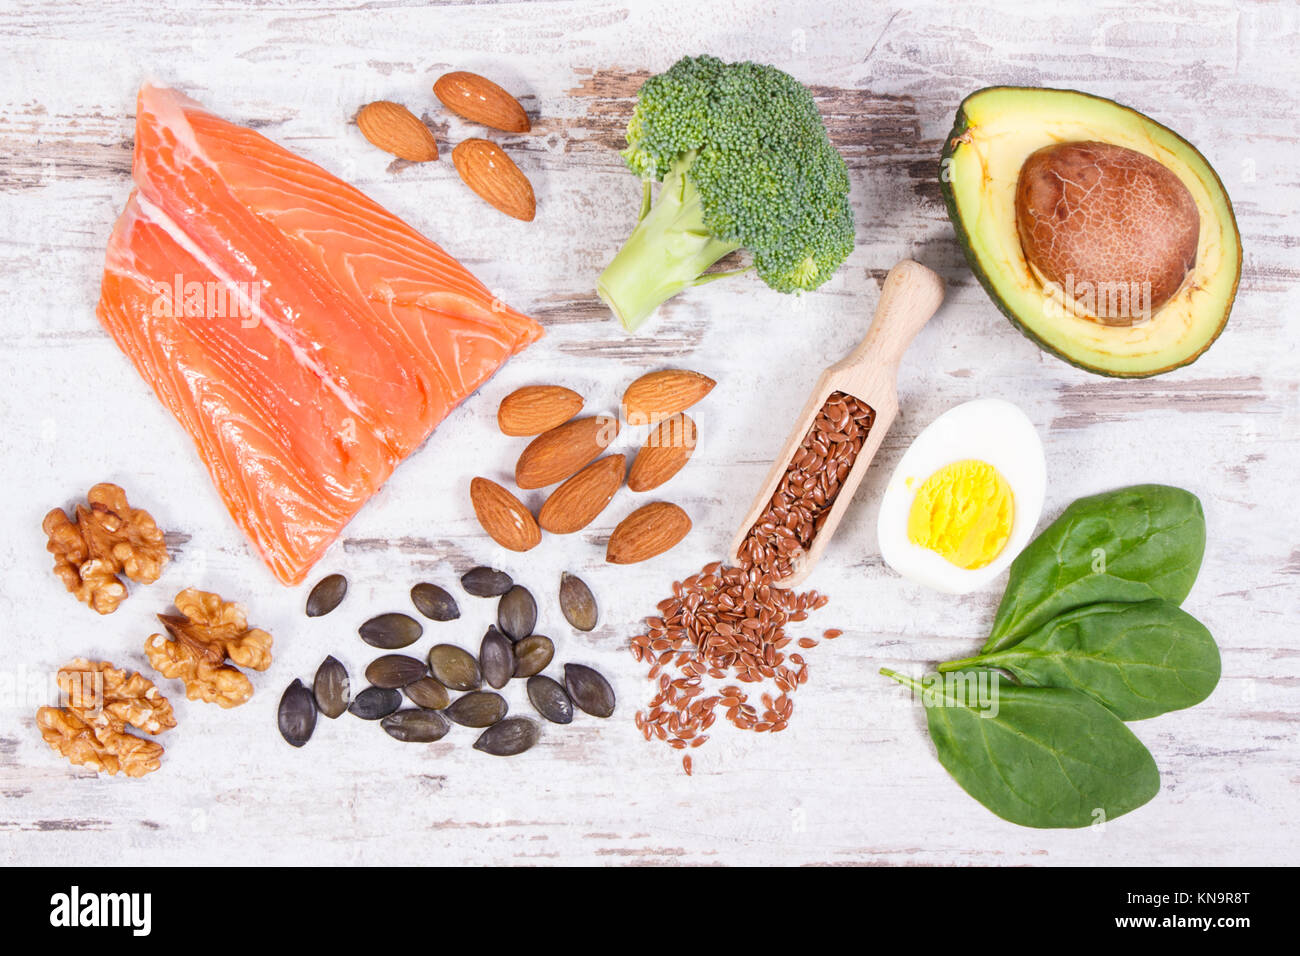 Natural sources of omega 3 acids, unsaturated fats and dietary fiber, concept of healthy nutrition Stock Photo